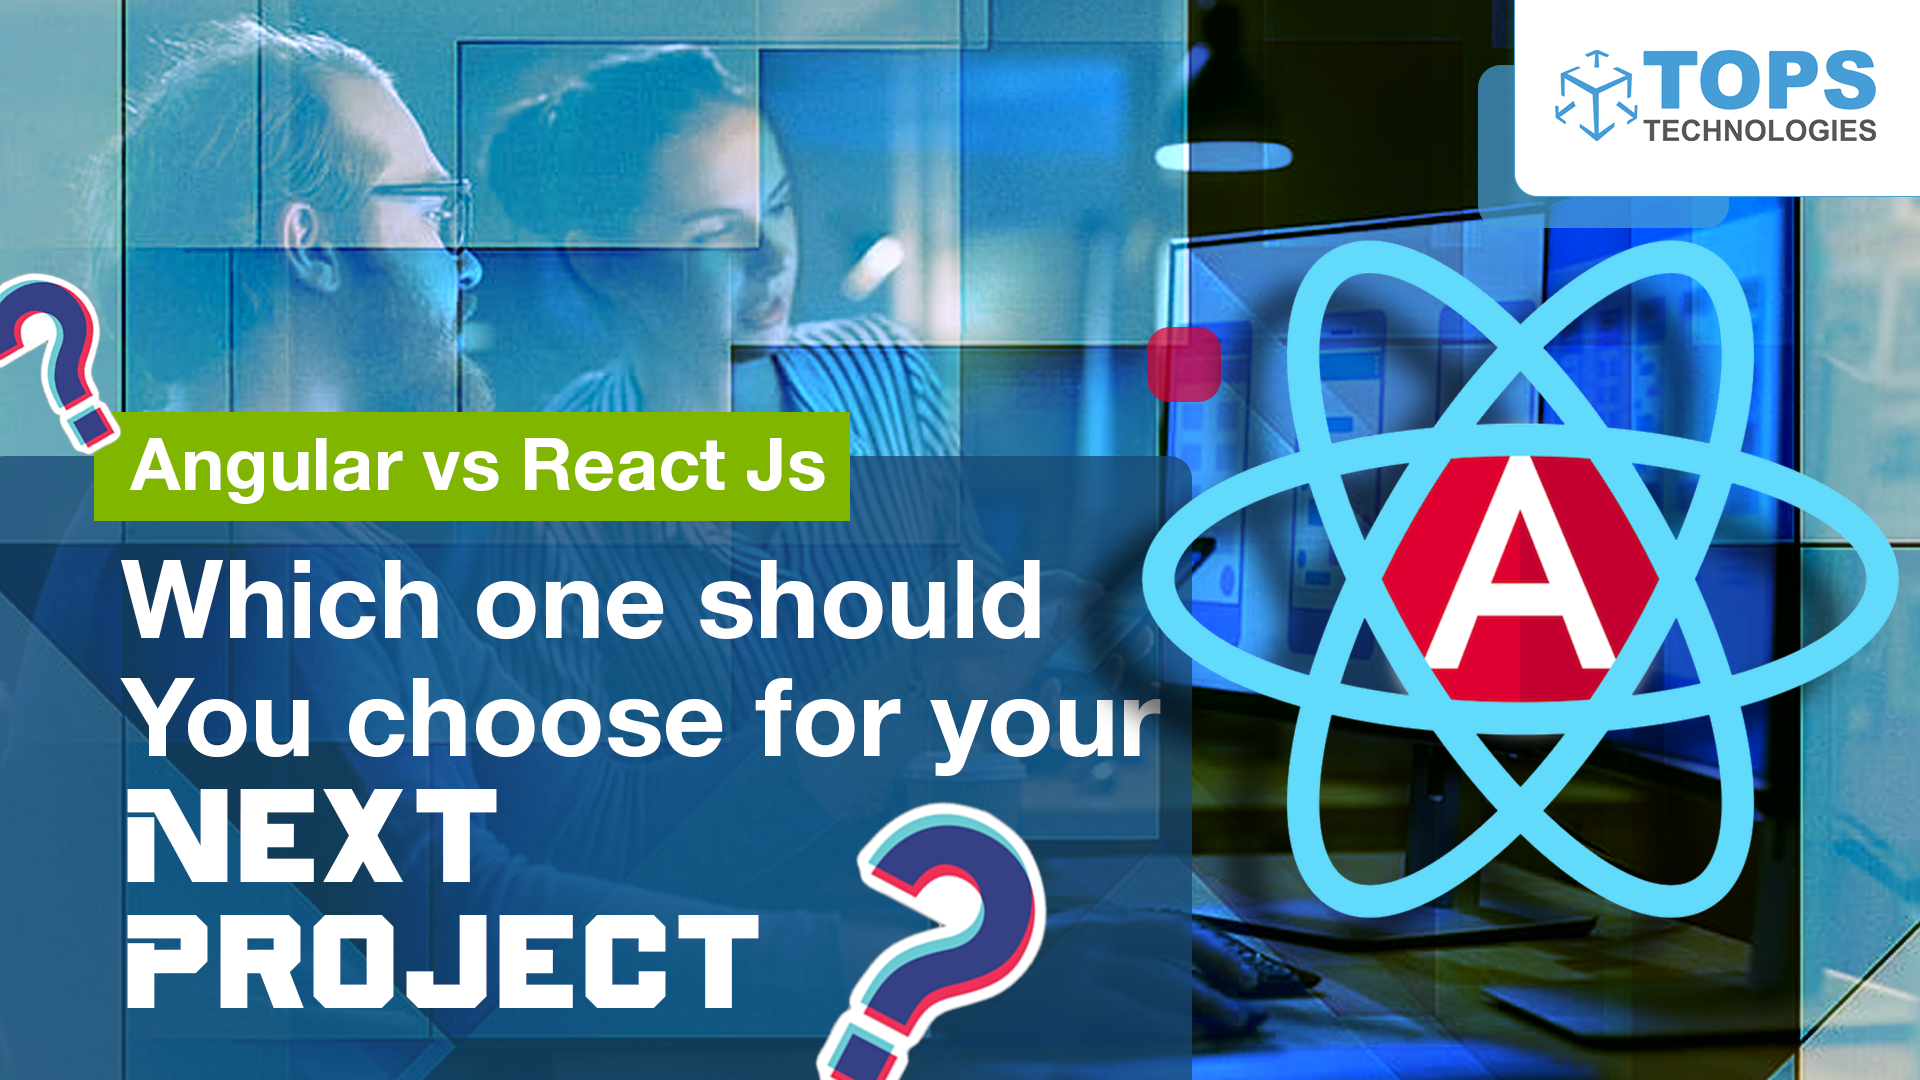 Angular VS React JS - Which one should you choose for your Next Project? Icon Image